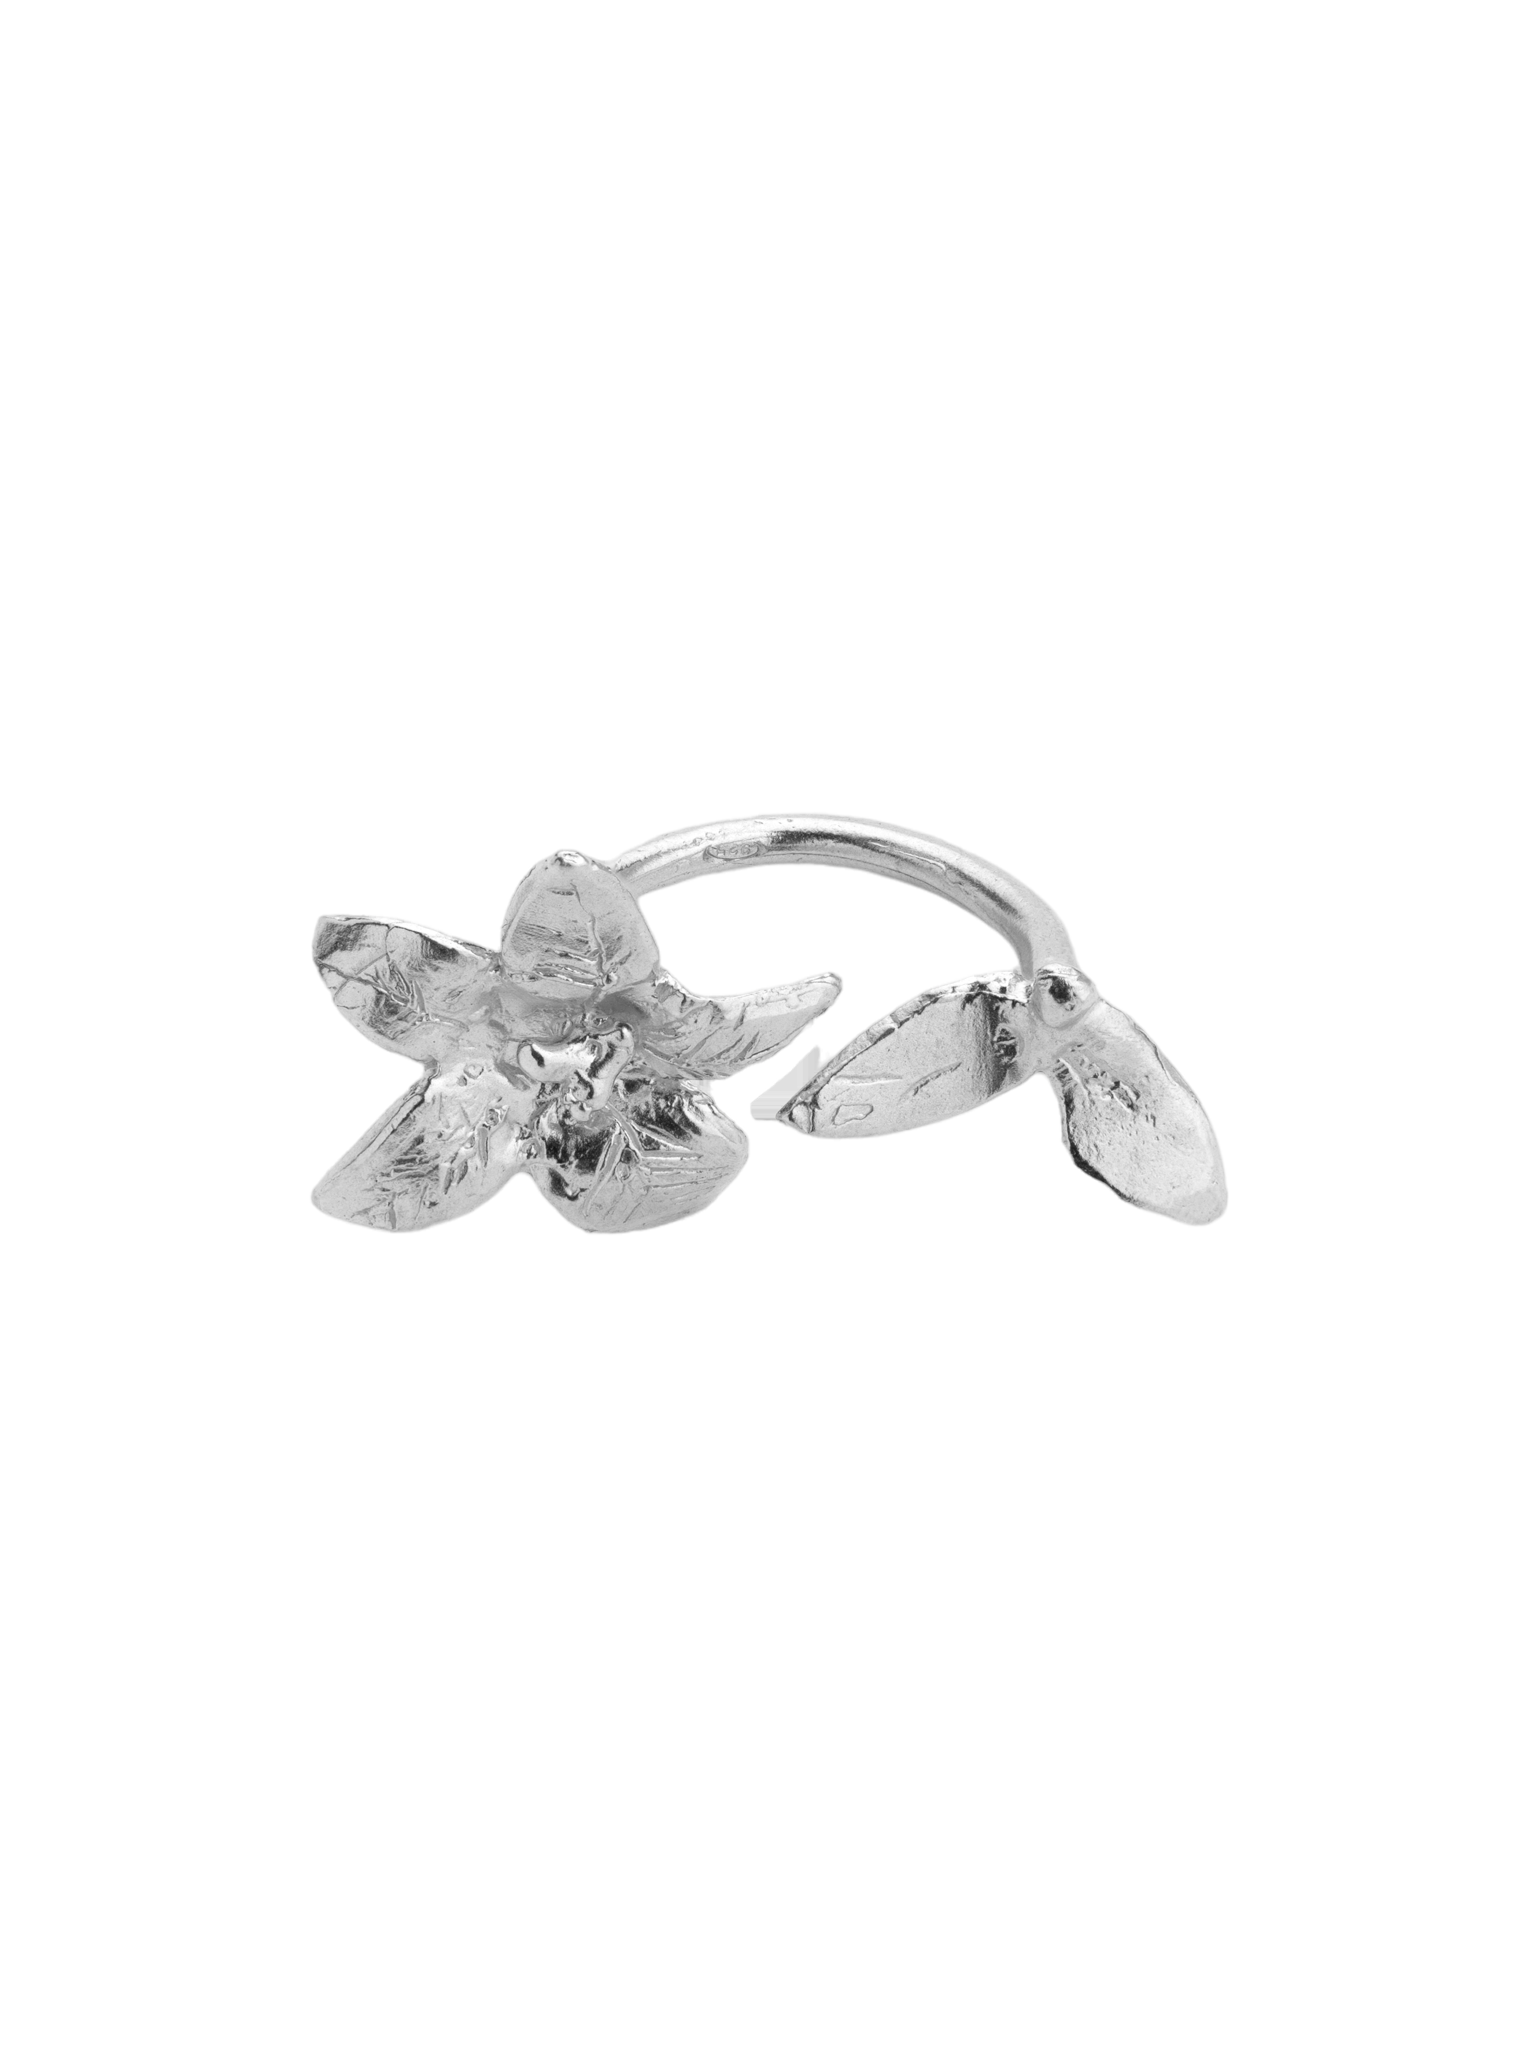 Adjustable flowers double ring